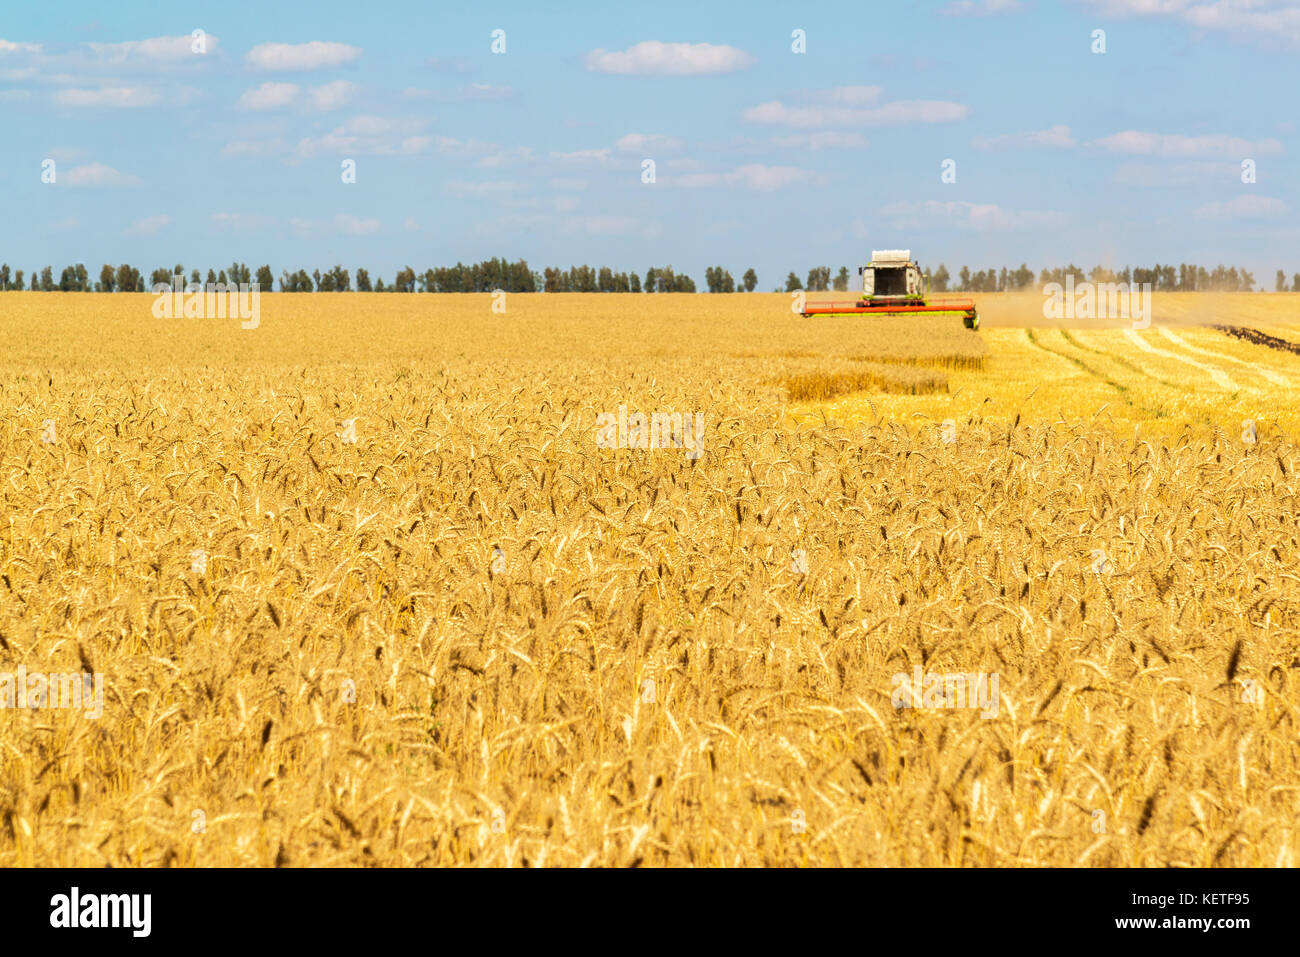 The combine works on Big Field of Ripe Wheat. Russia Stock Photo